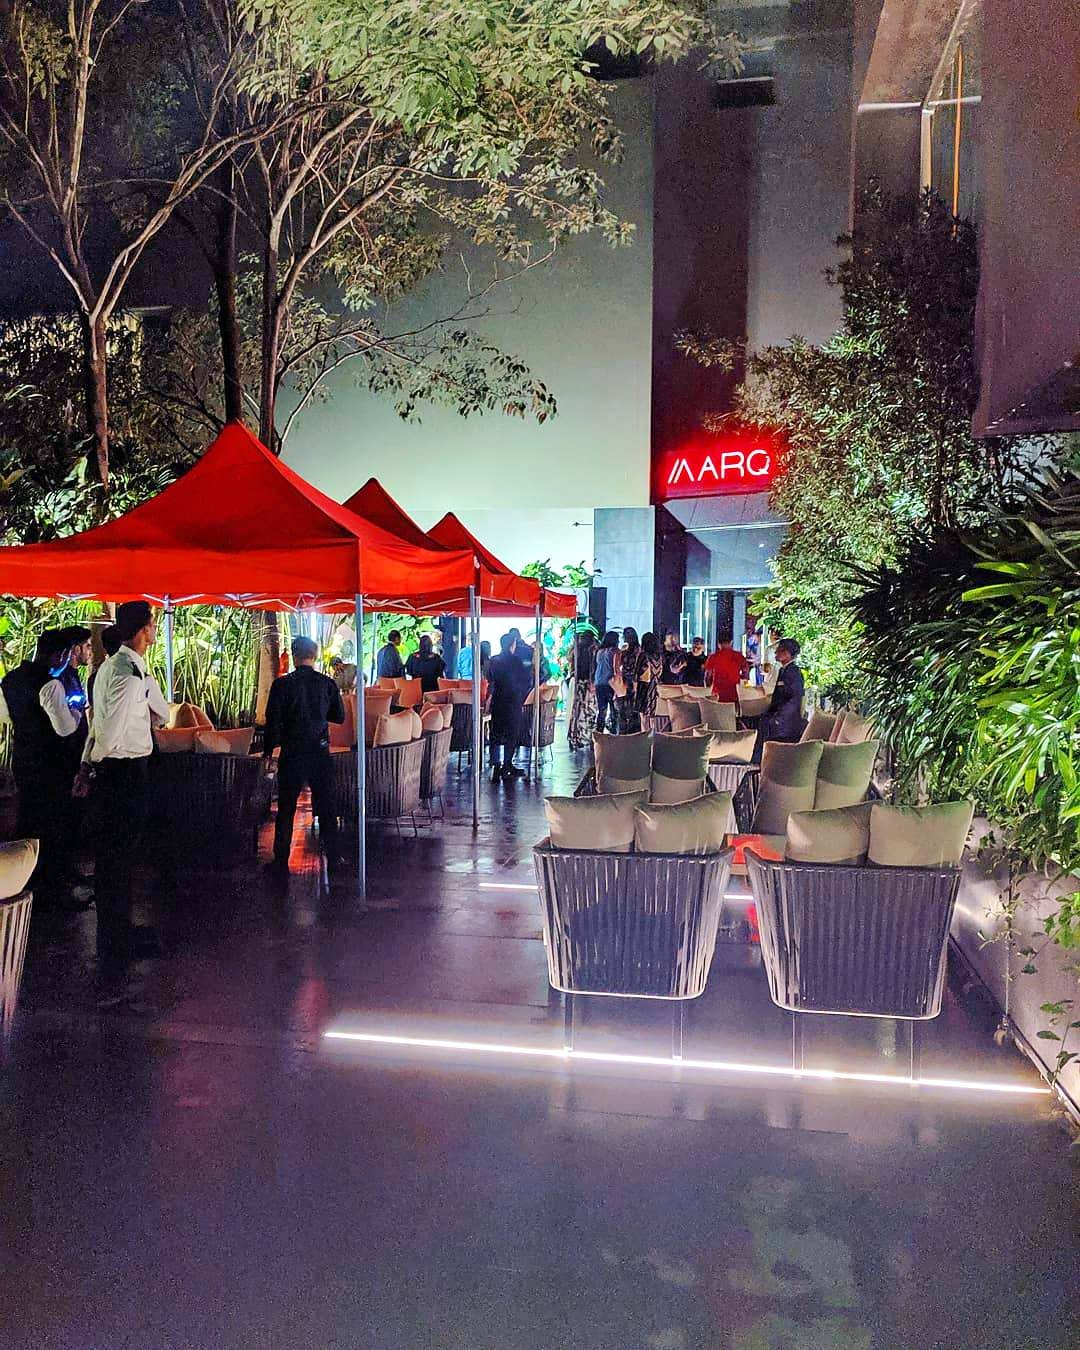 Millennial Listen Up! Marquis Is The Newest Addition To The Night Clubs In The City